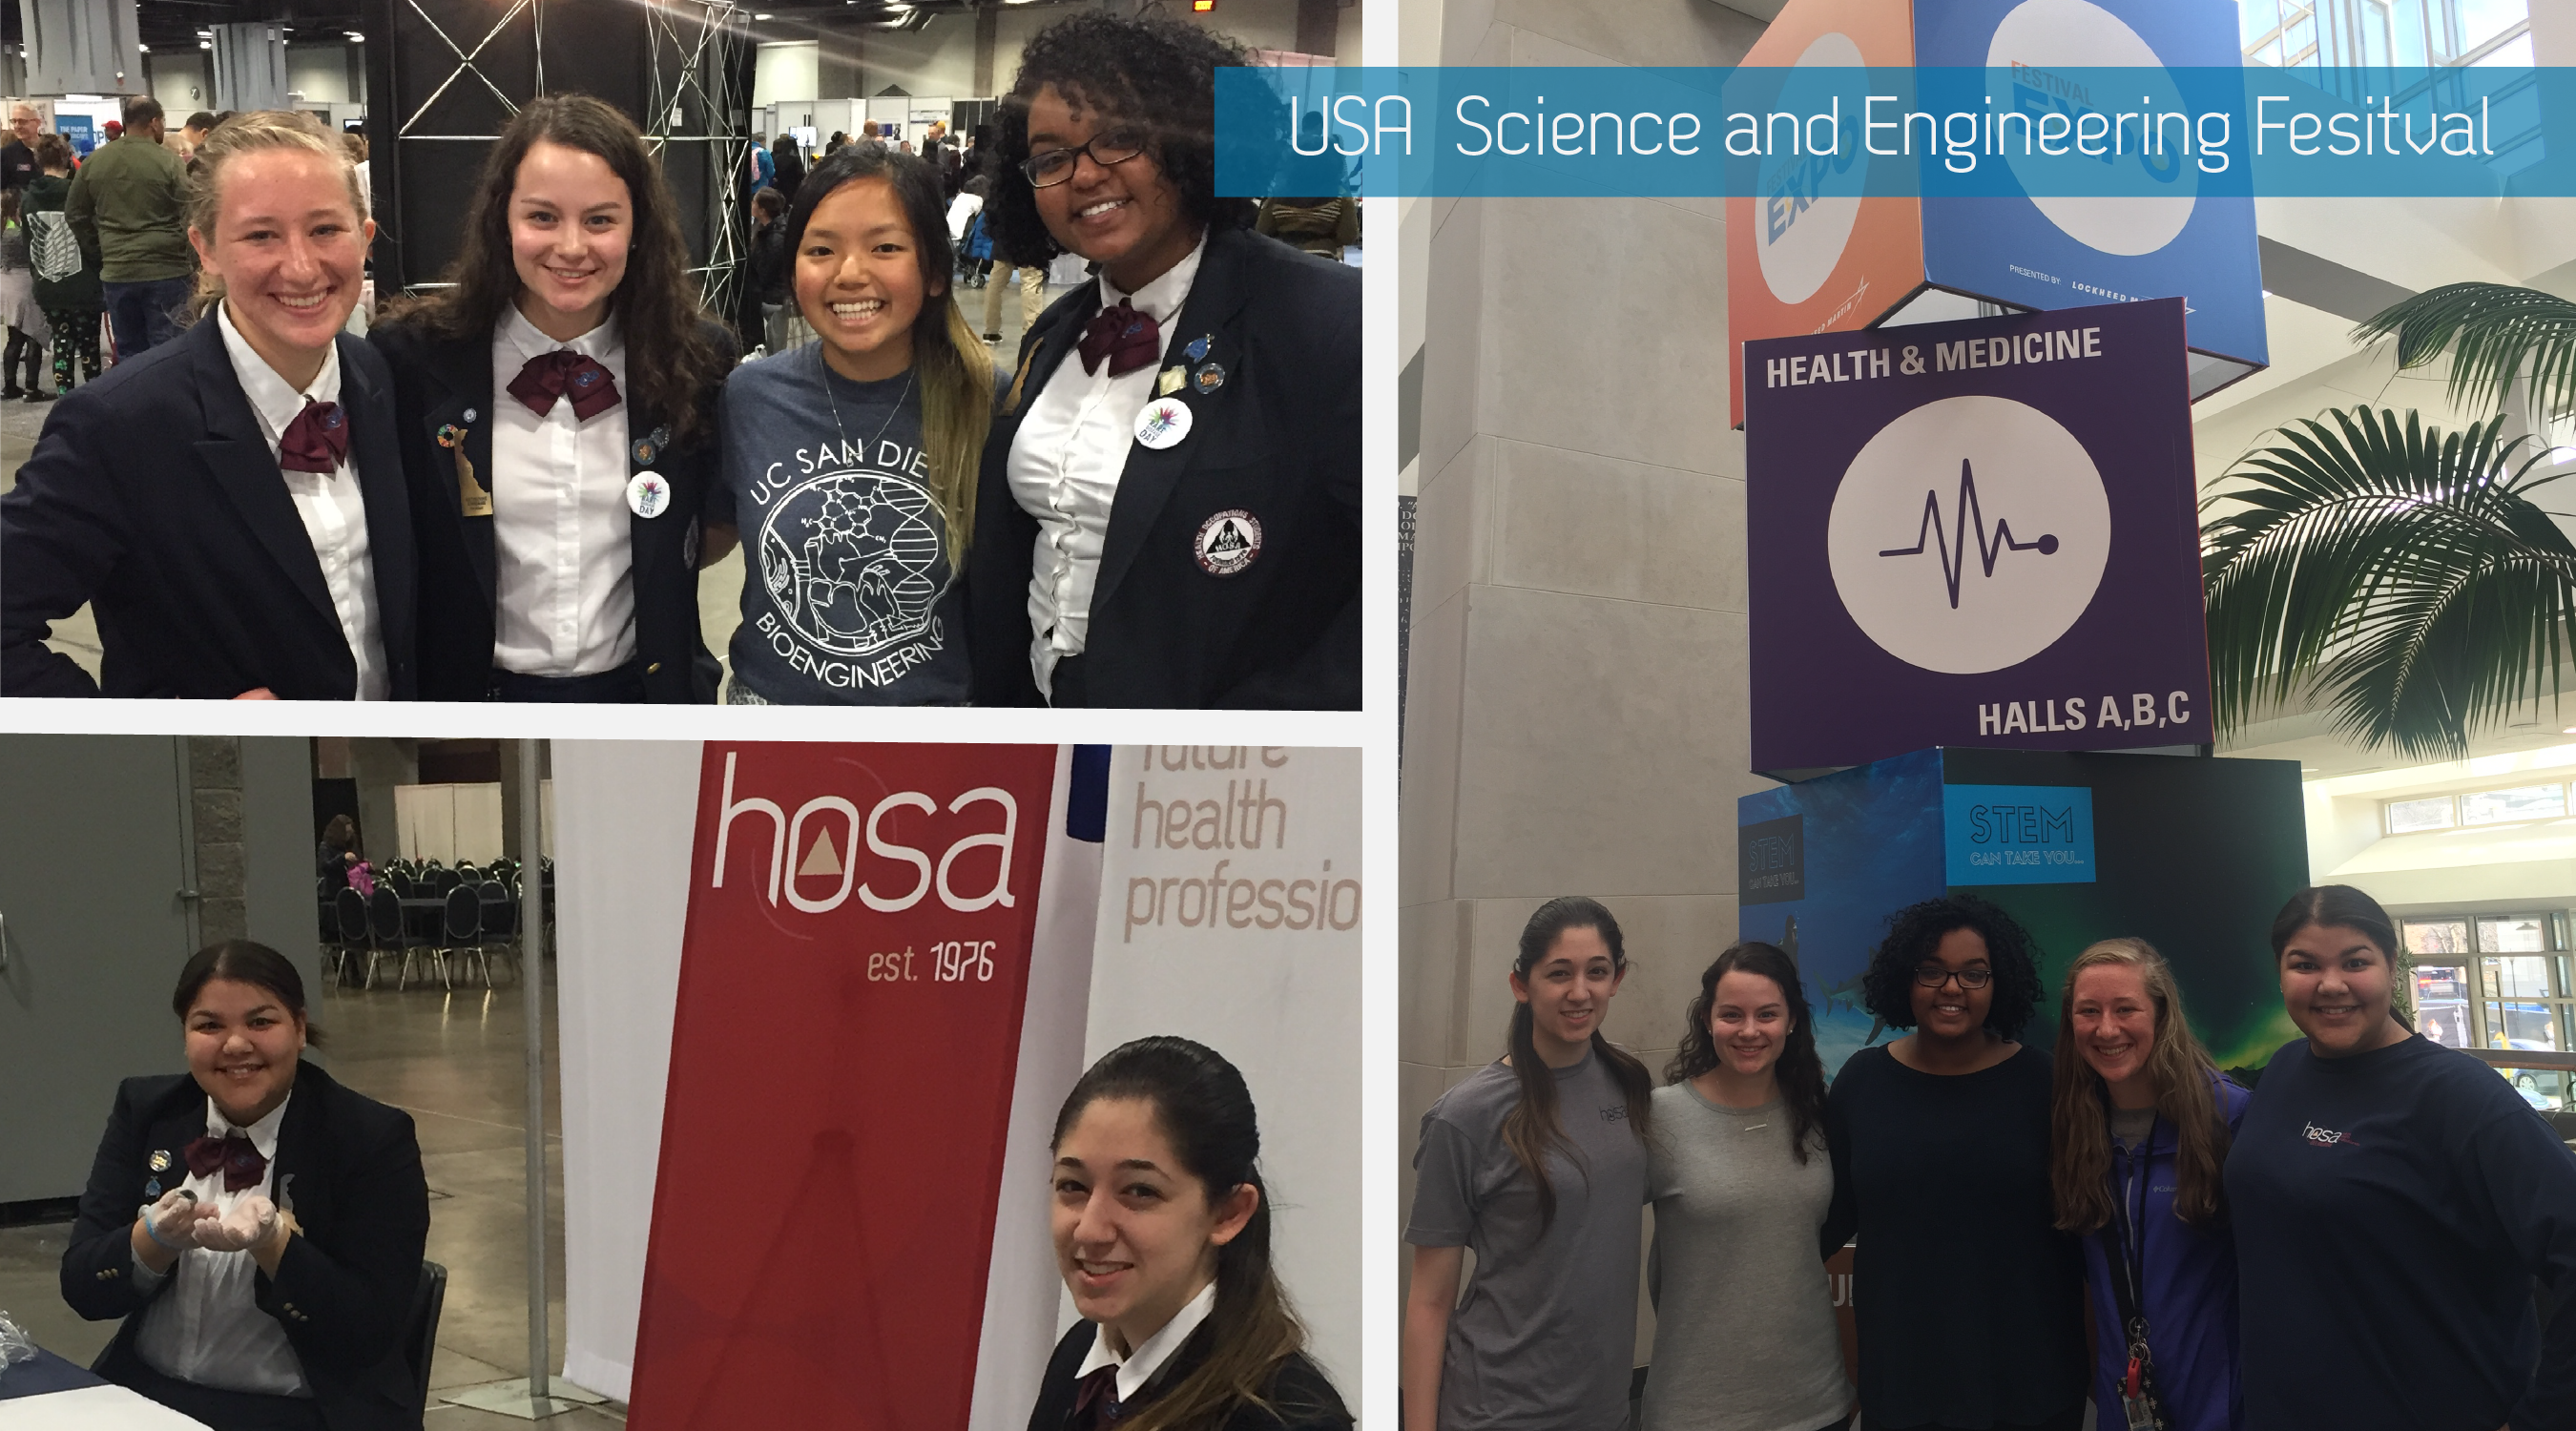 Delaware HOSA at USA Science and Engineering Festival